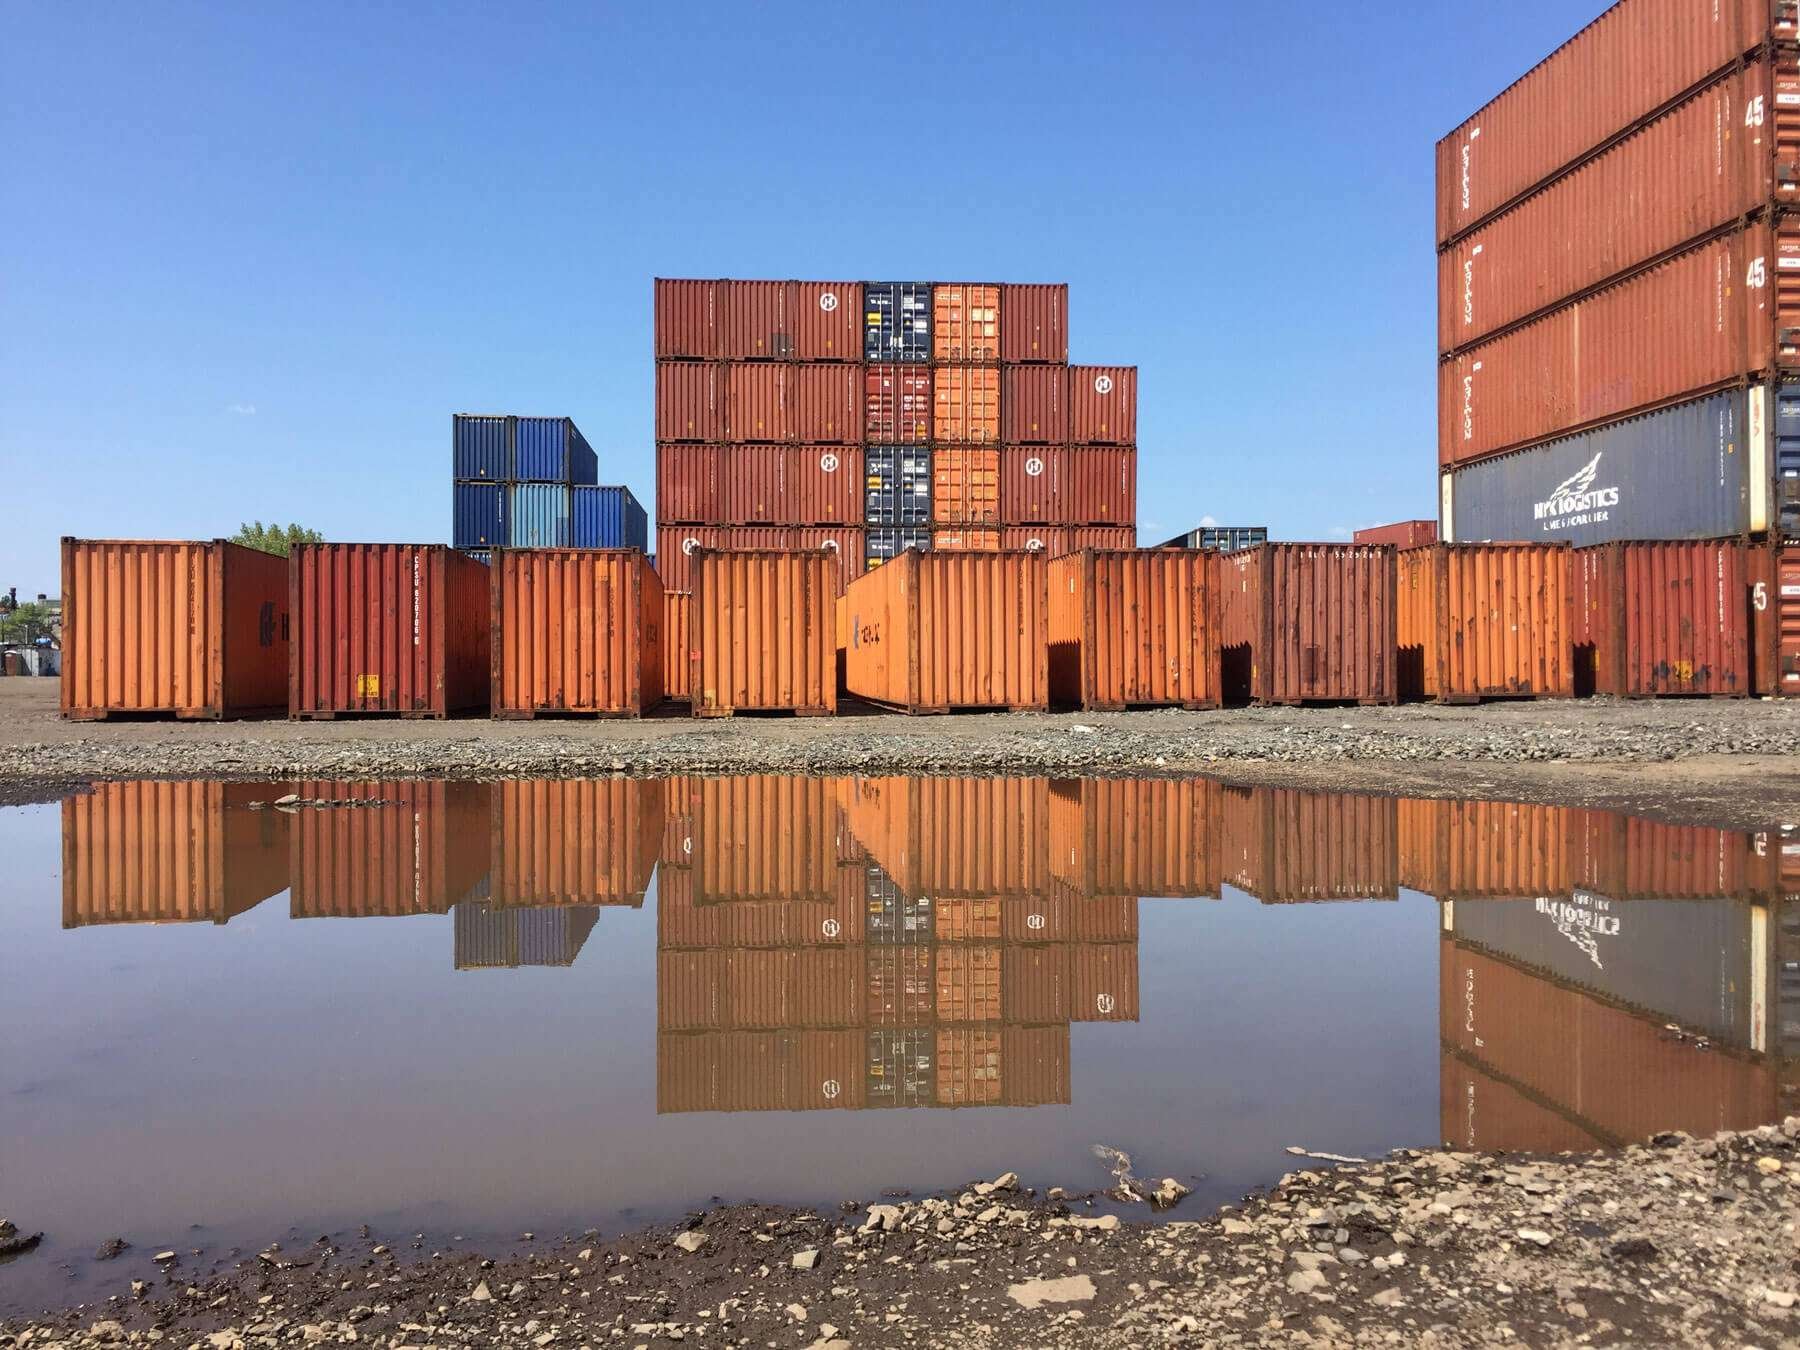  Stacks of shipping containers and their reflection in a puddle. 